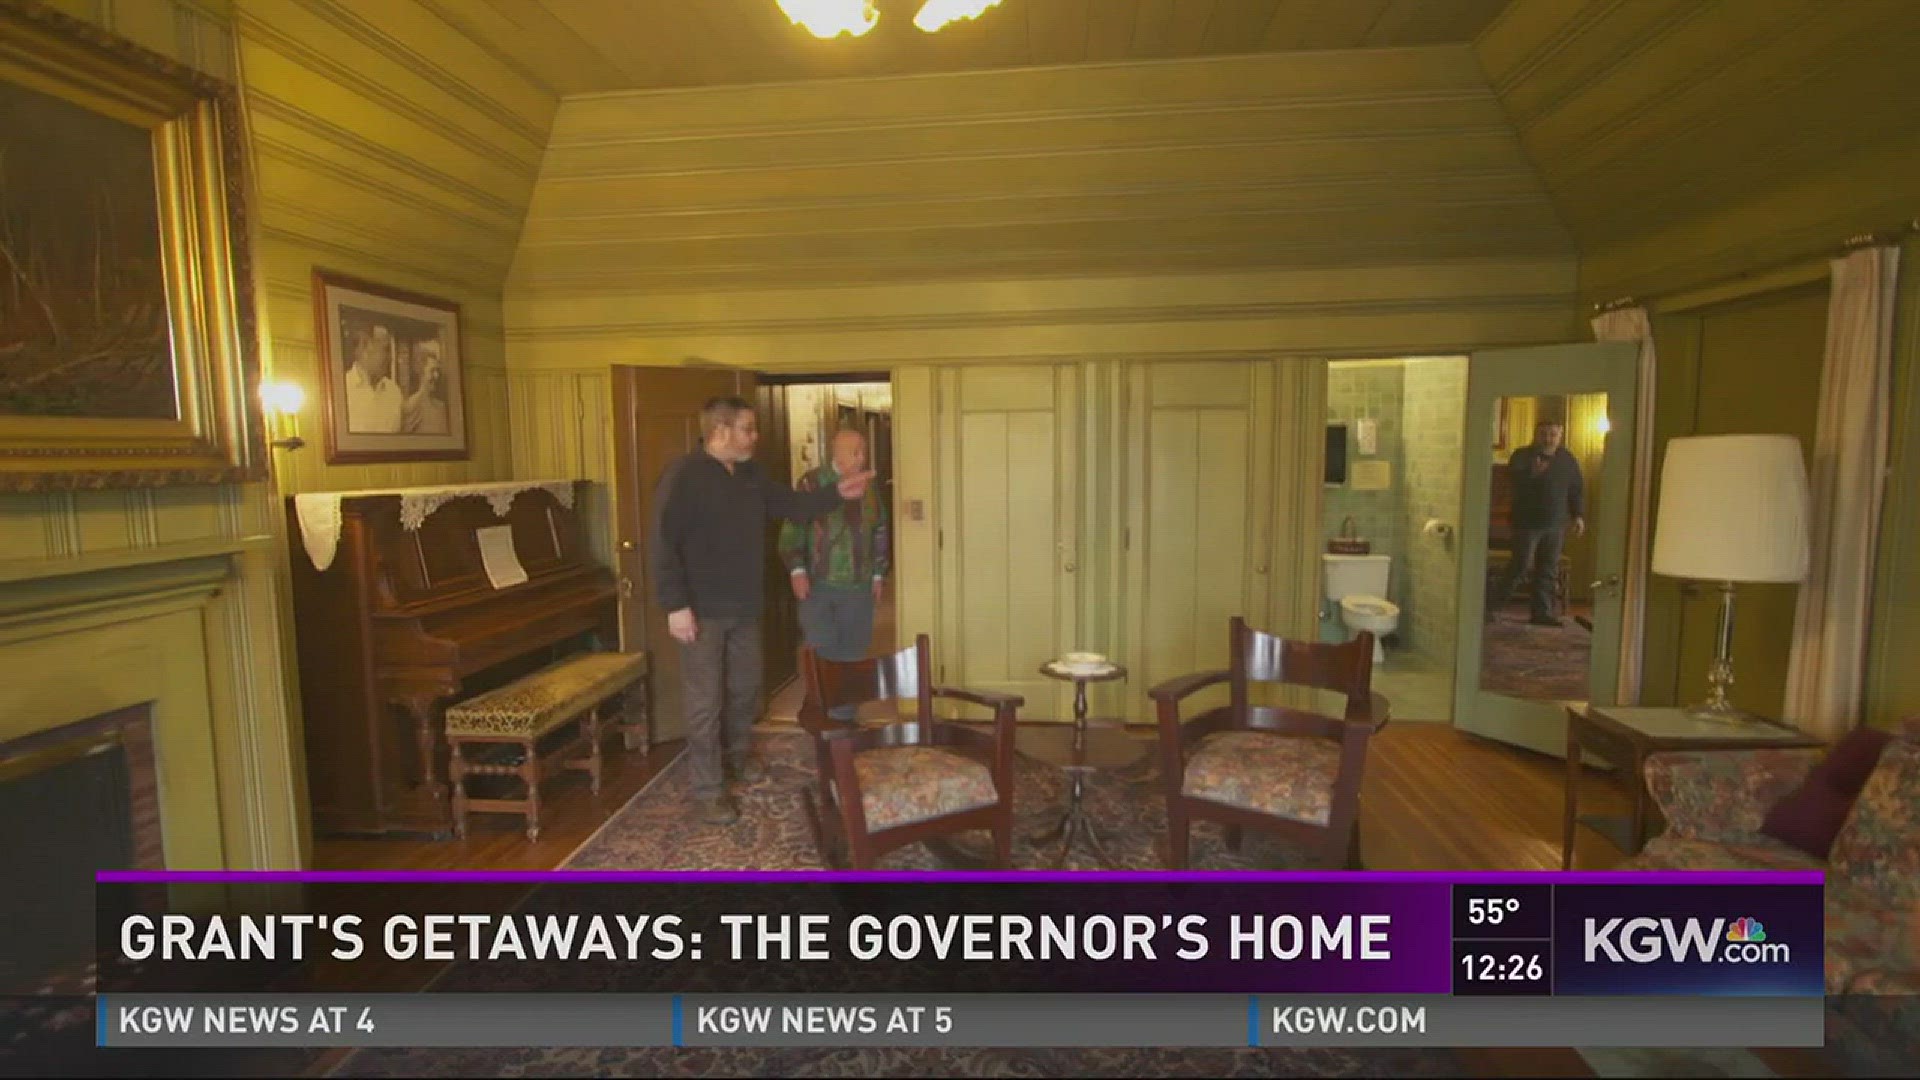 Grant's Getaways: The Governor's Home.